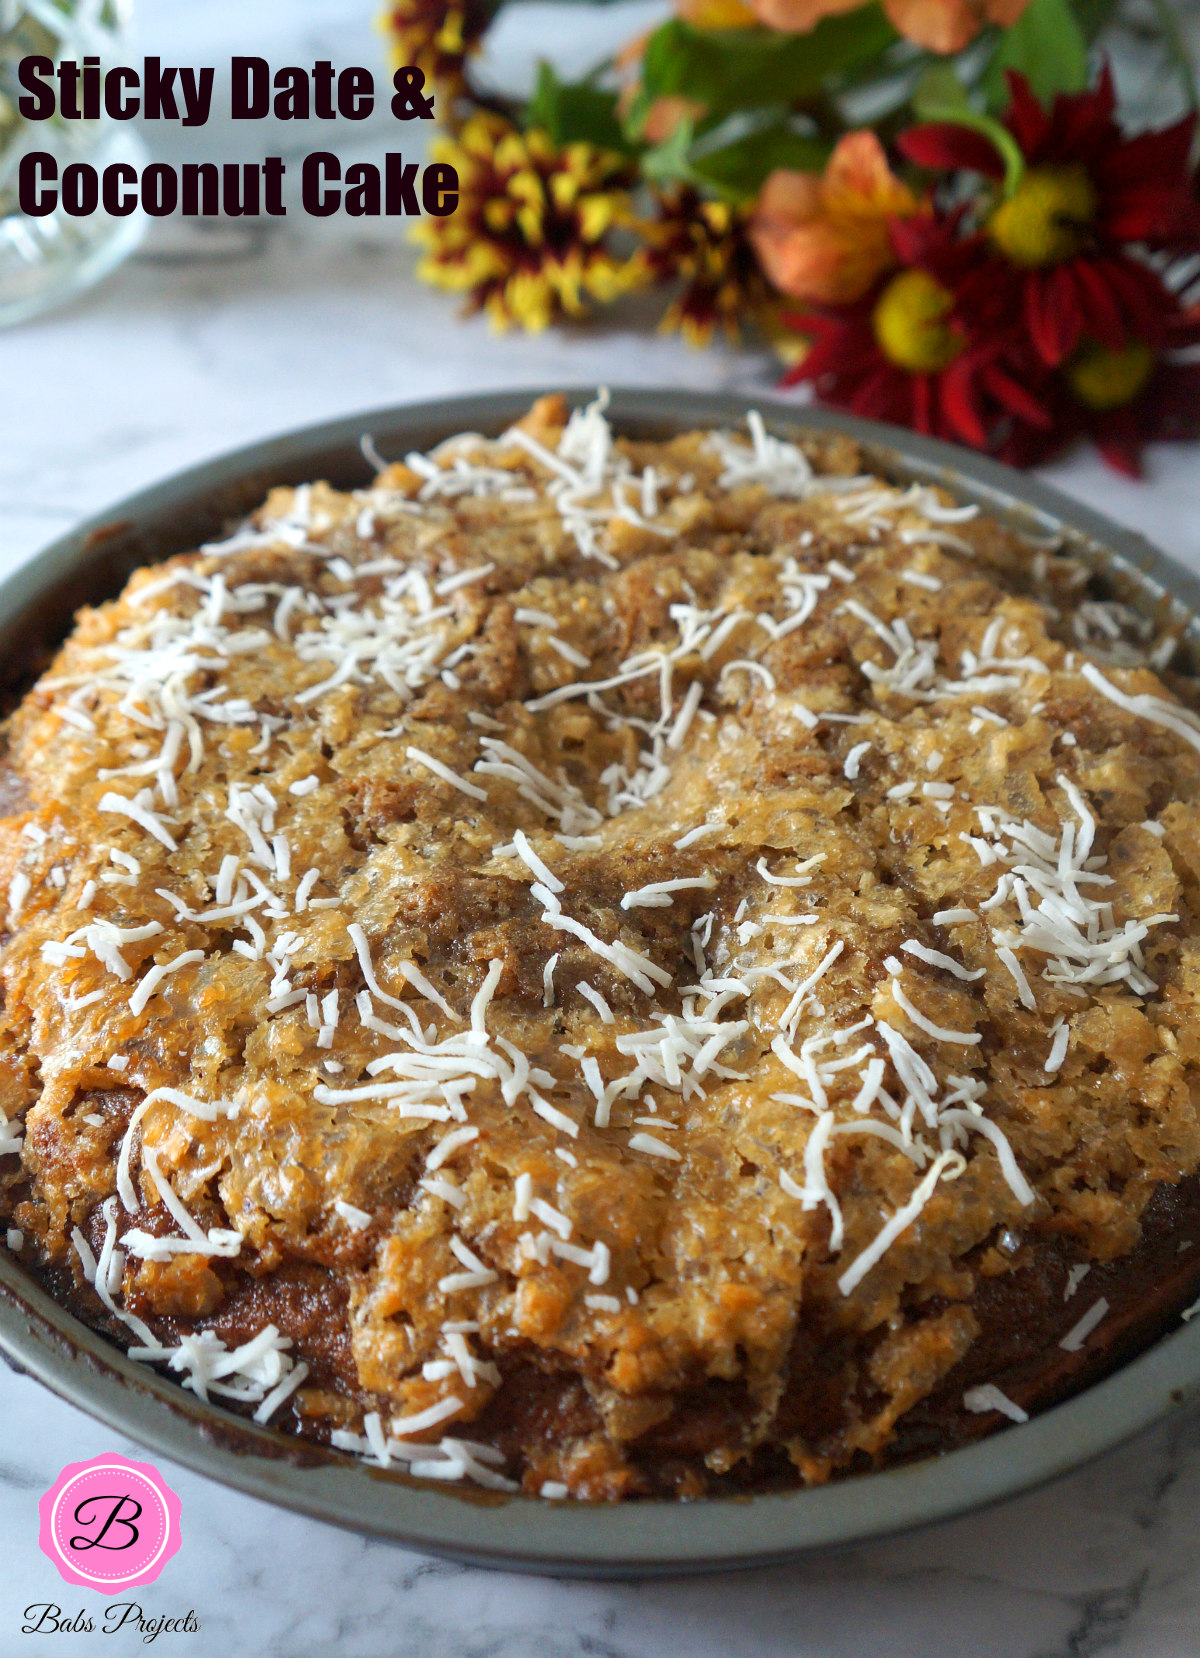 Sticky Date Coconut Cake in a Baking Pan and Flowers on the side